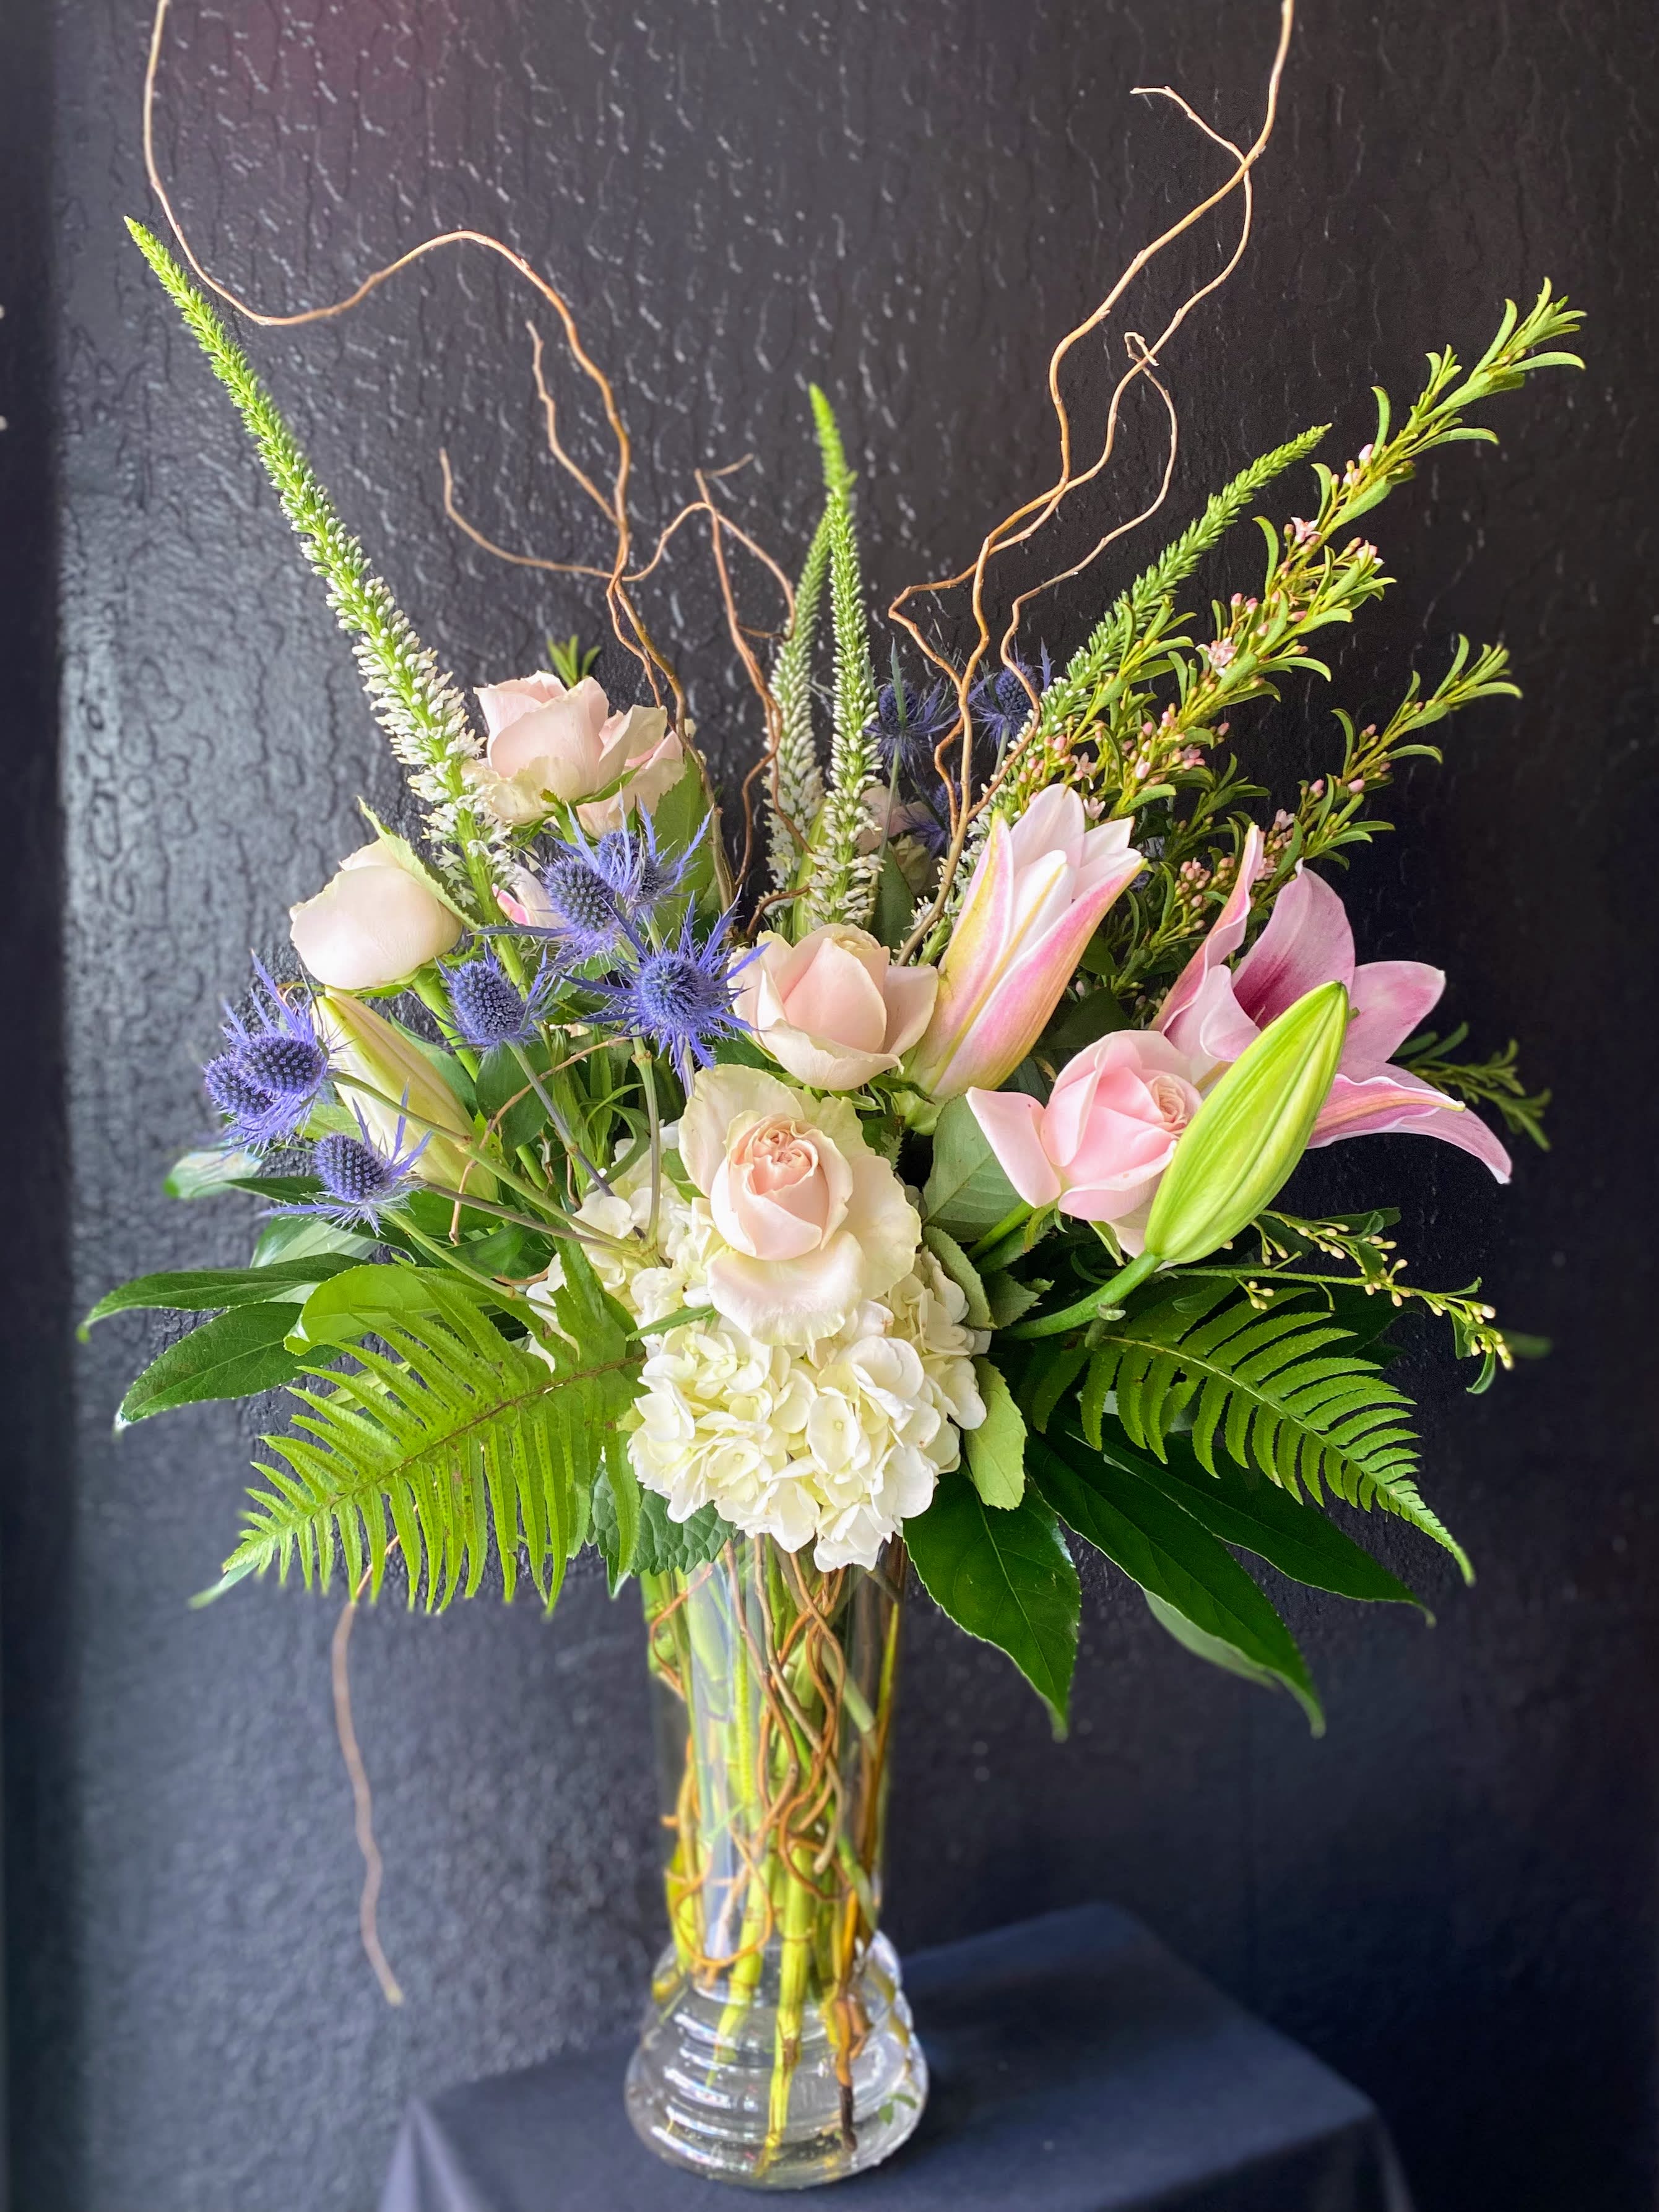 Tina  - A fragrant arrangement with pink roses, lilles, and blues in a cluster-style design that celebrates femininity. The container measures roughly 12&quot; tall  